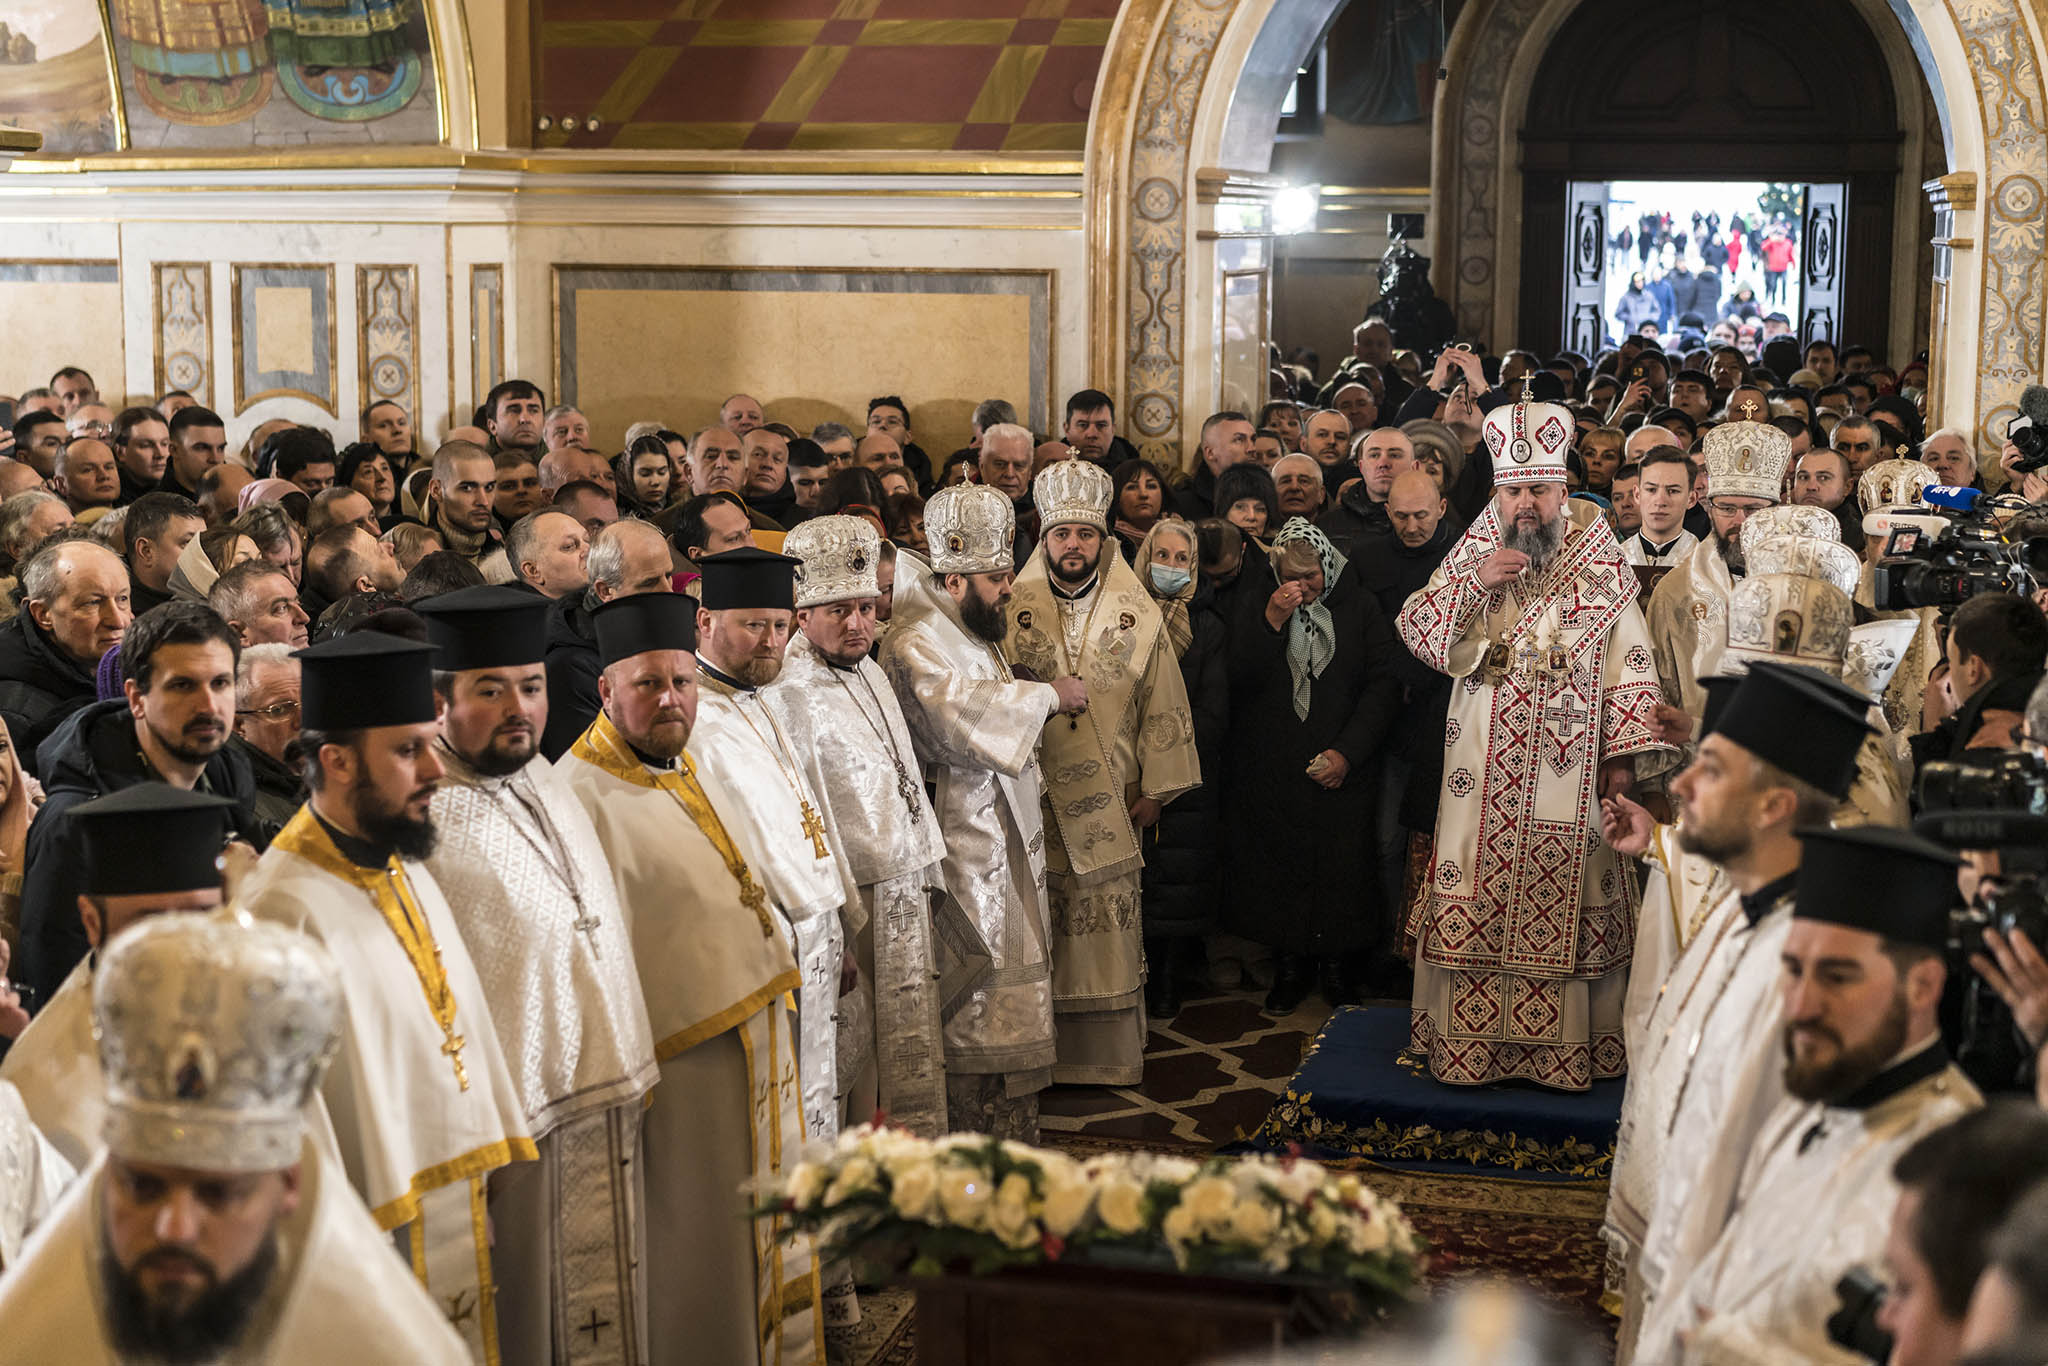 Metropolitan Epiphanius, primate of the Orthodox Church of Ukraine, leads Christmas rites in Kyiv. Russia’s invasion of Ukraine has deepened conflicts within the Ukrainian and the global Orthodox Christian communities. (Brendan Hoffman/The New York Times)